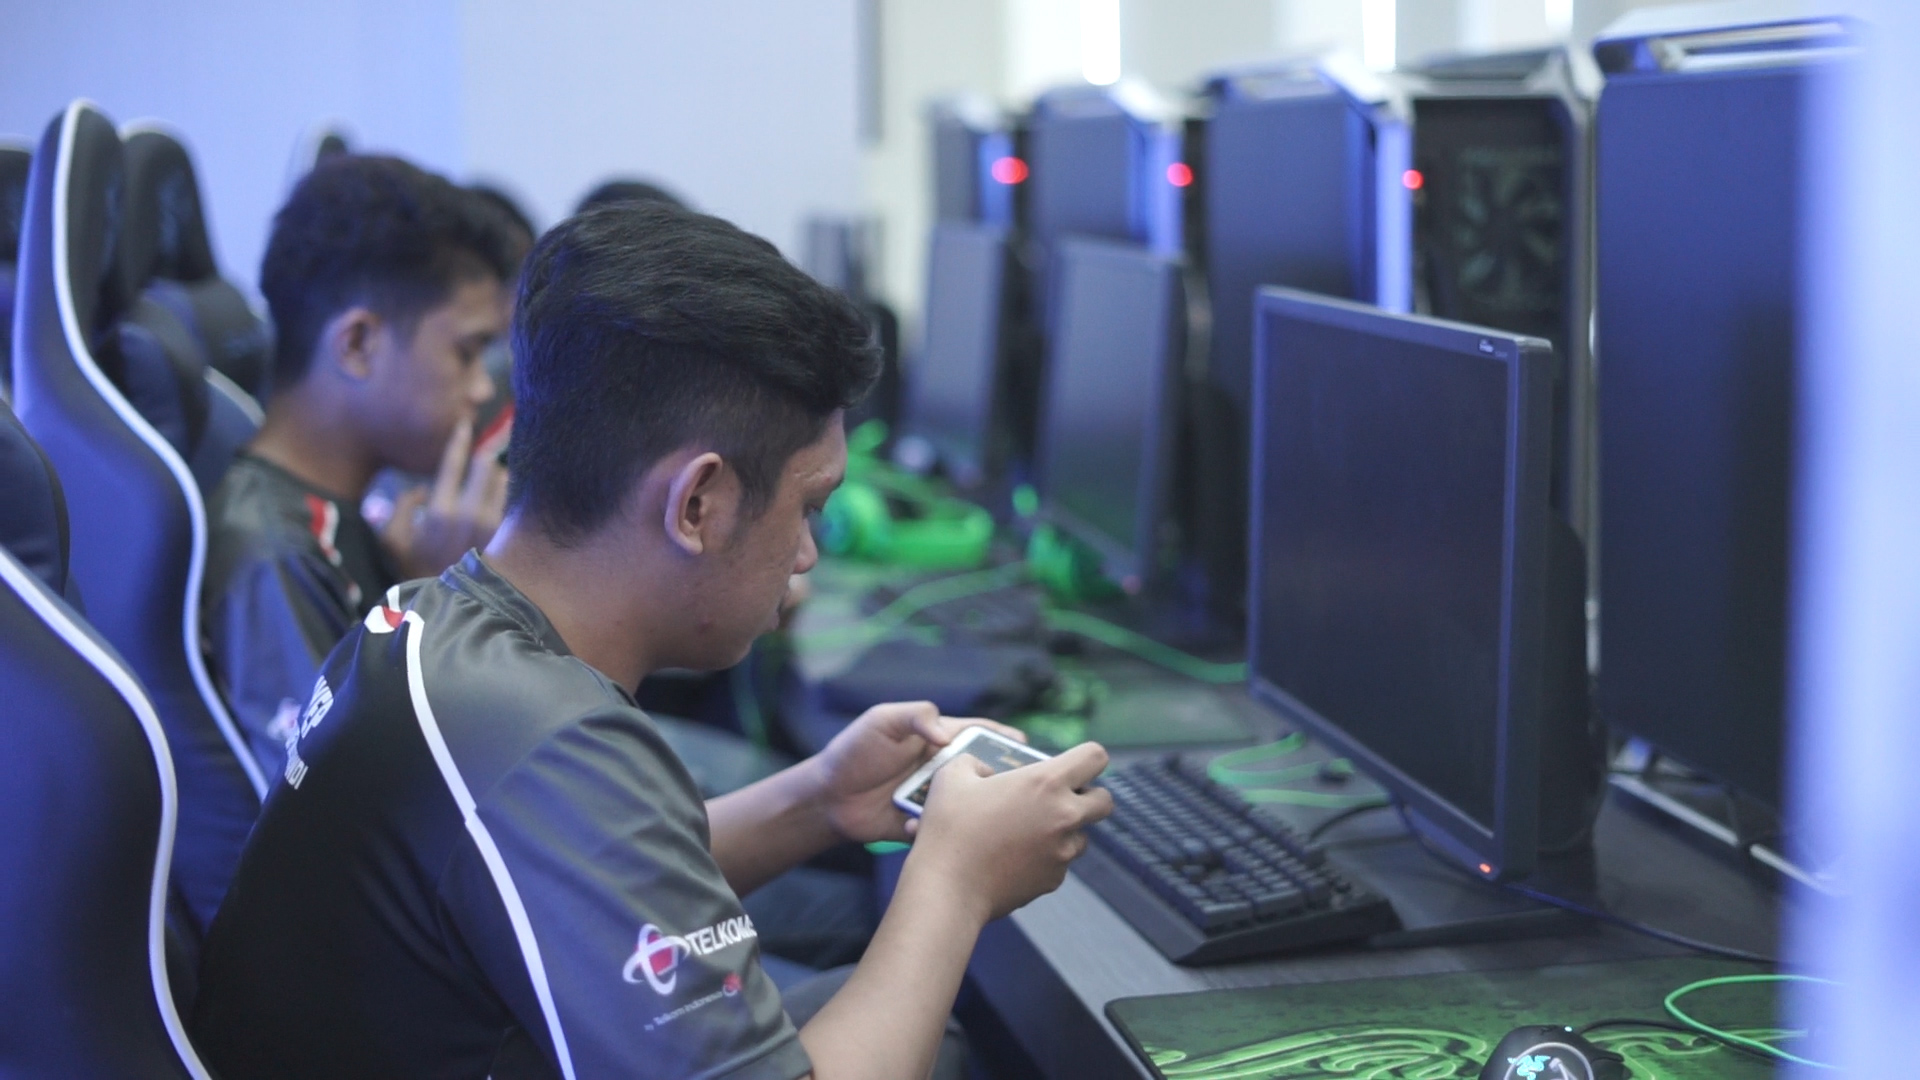 The US and China lead global gaming, but how are they developing the next generation of talent?